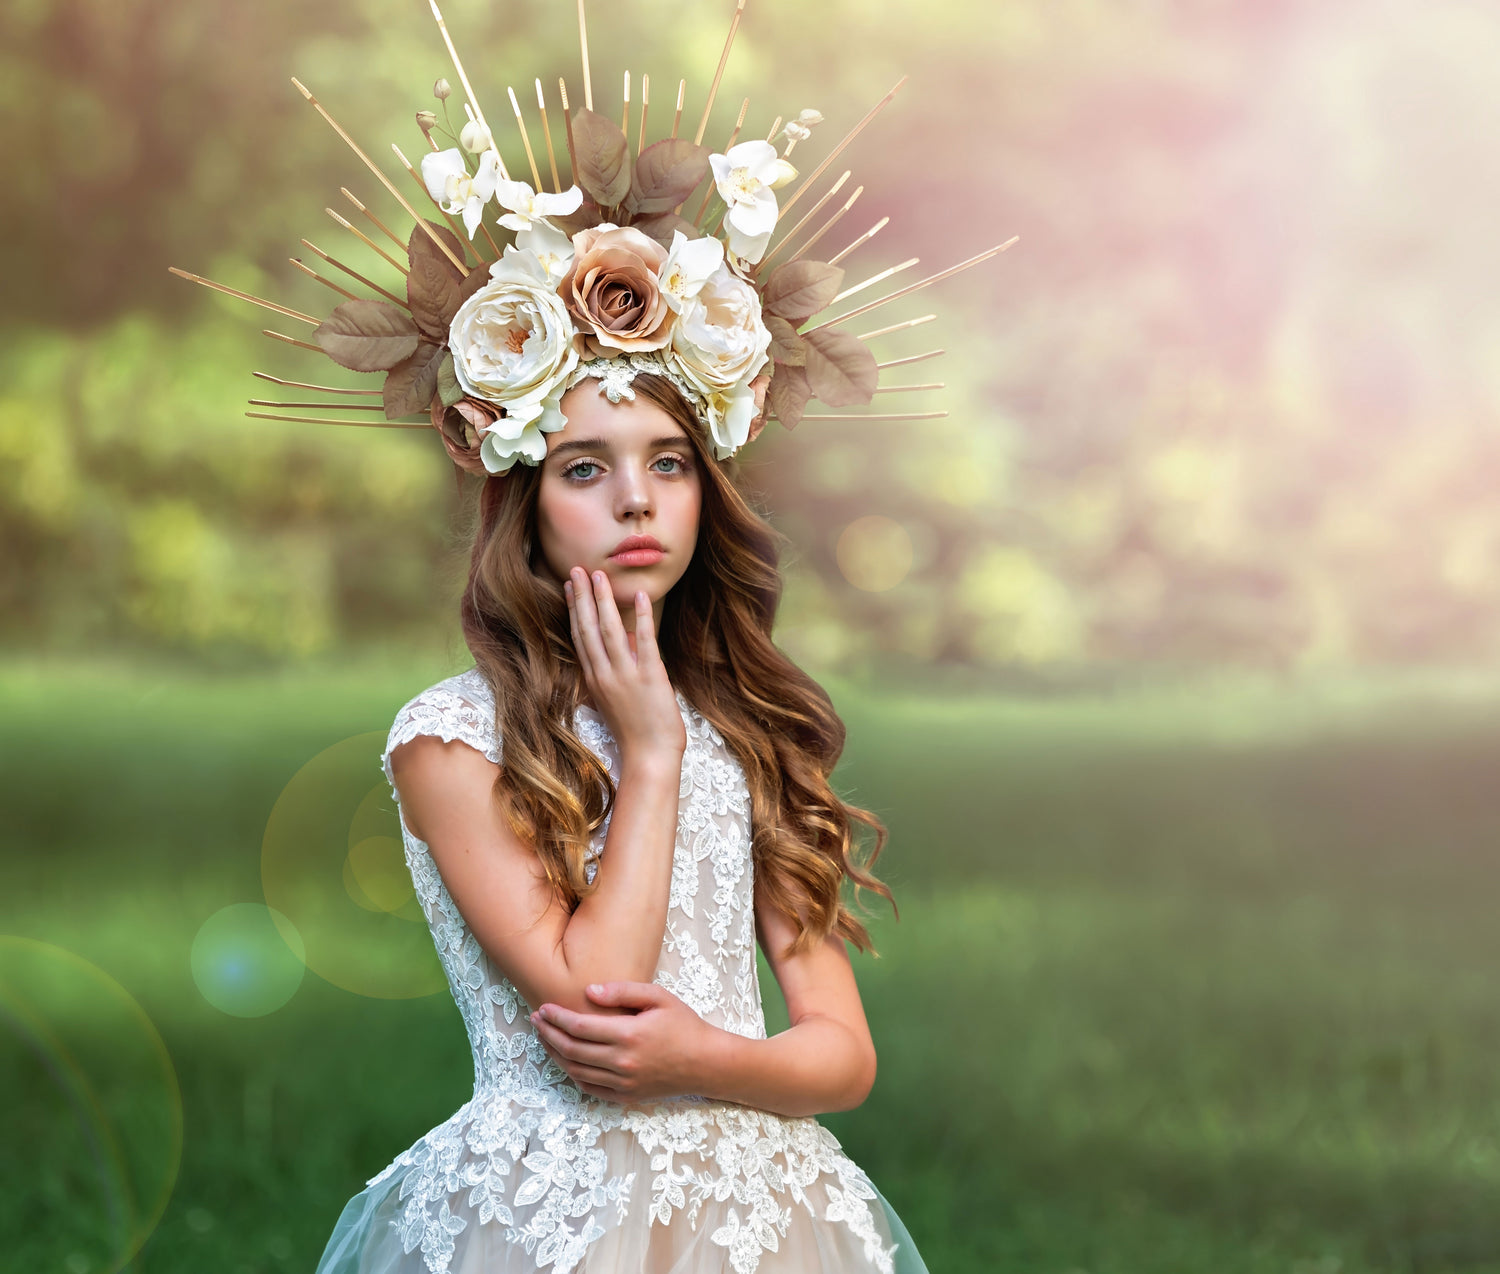 <alt>beautiful young girl in a luxury couture gown wearing a flower headpiece of cream roses and gold spikes</alt>